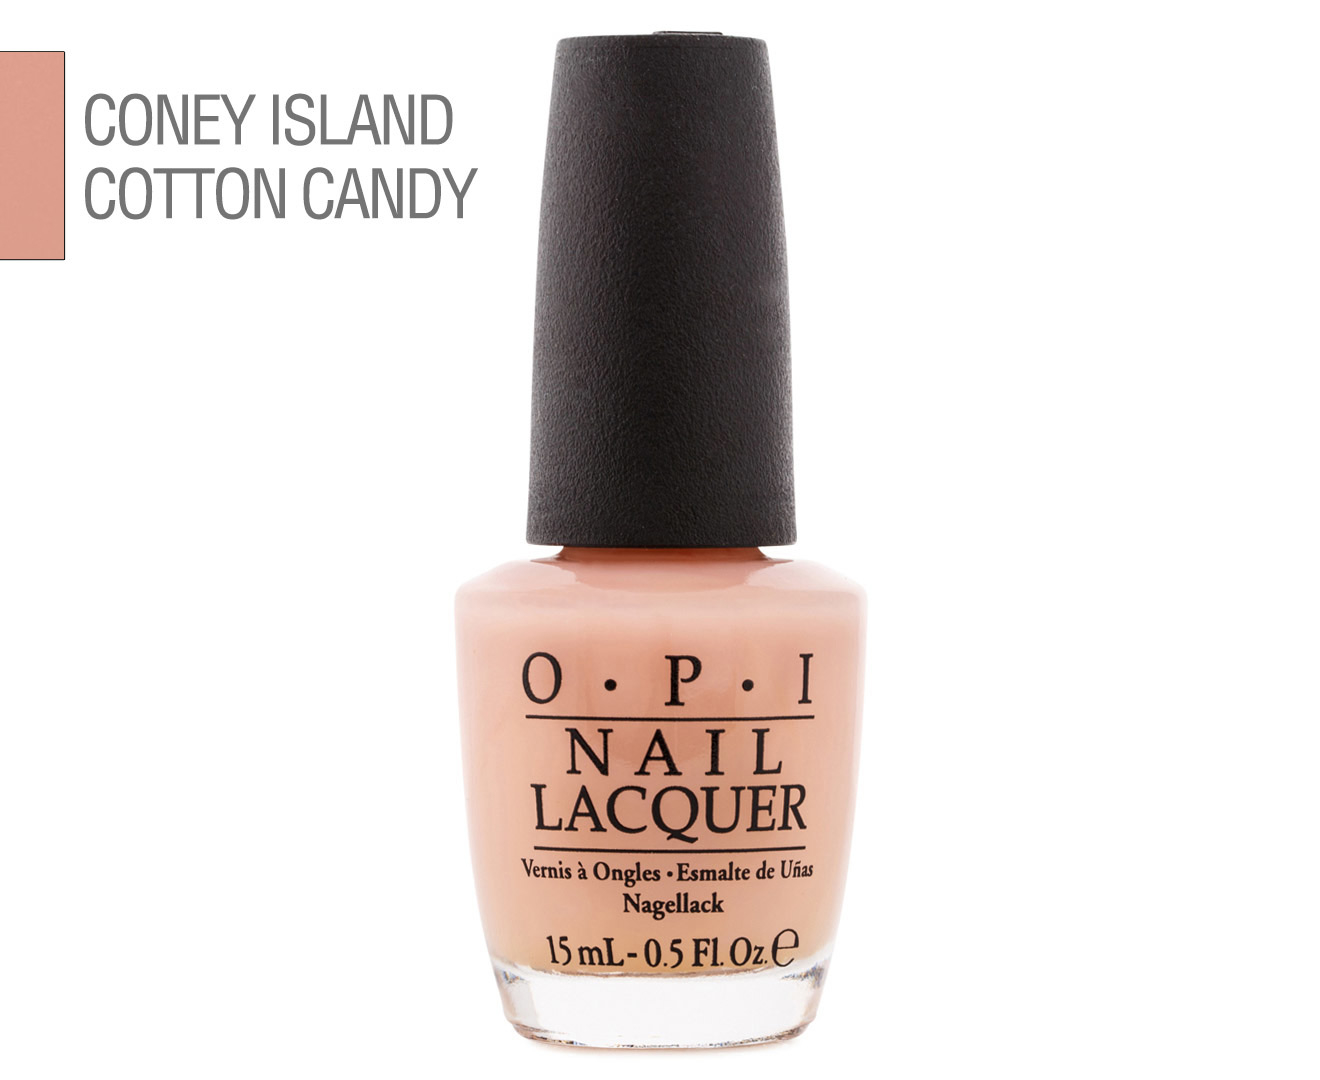 OPI Nail Lacquer, Dock & Bay - wide 2